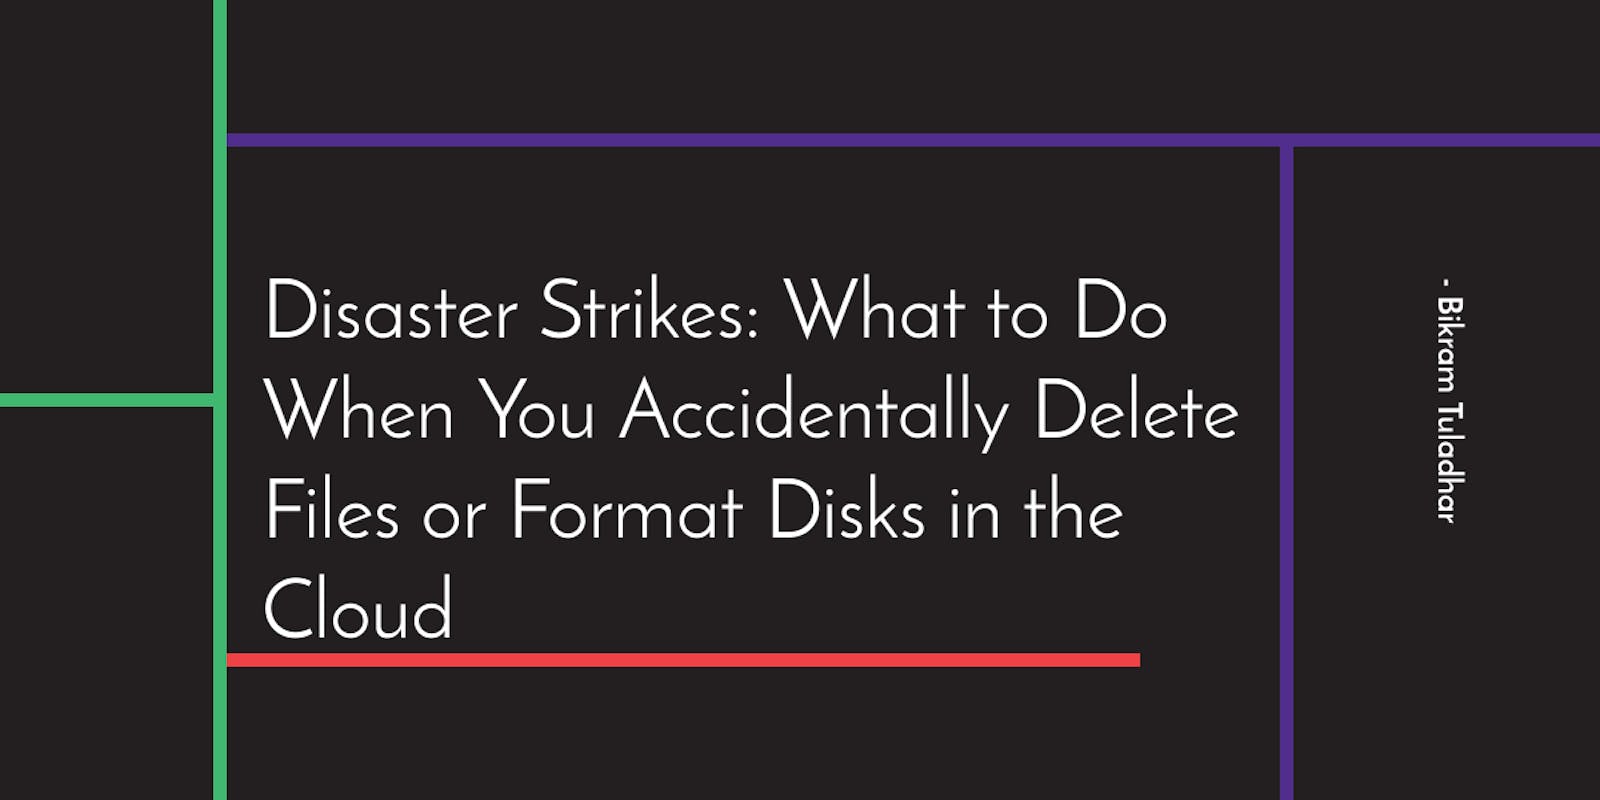 Disaster Strikes: What to Do When You Accidentally Delete Files or Format Disks in the Cloud